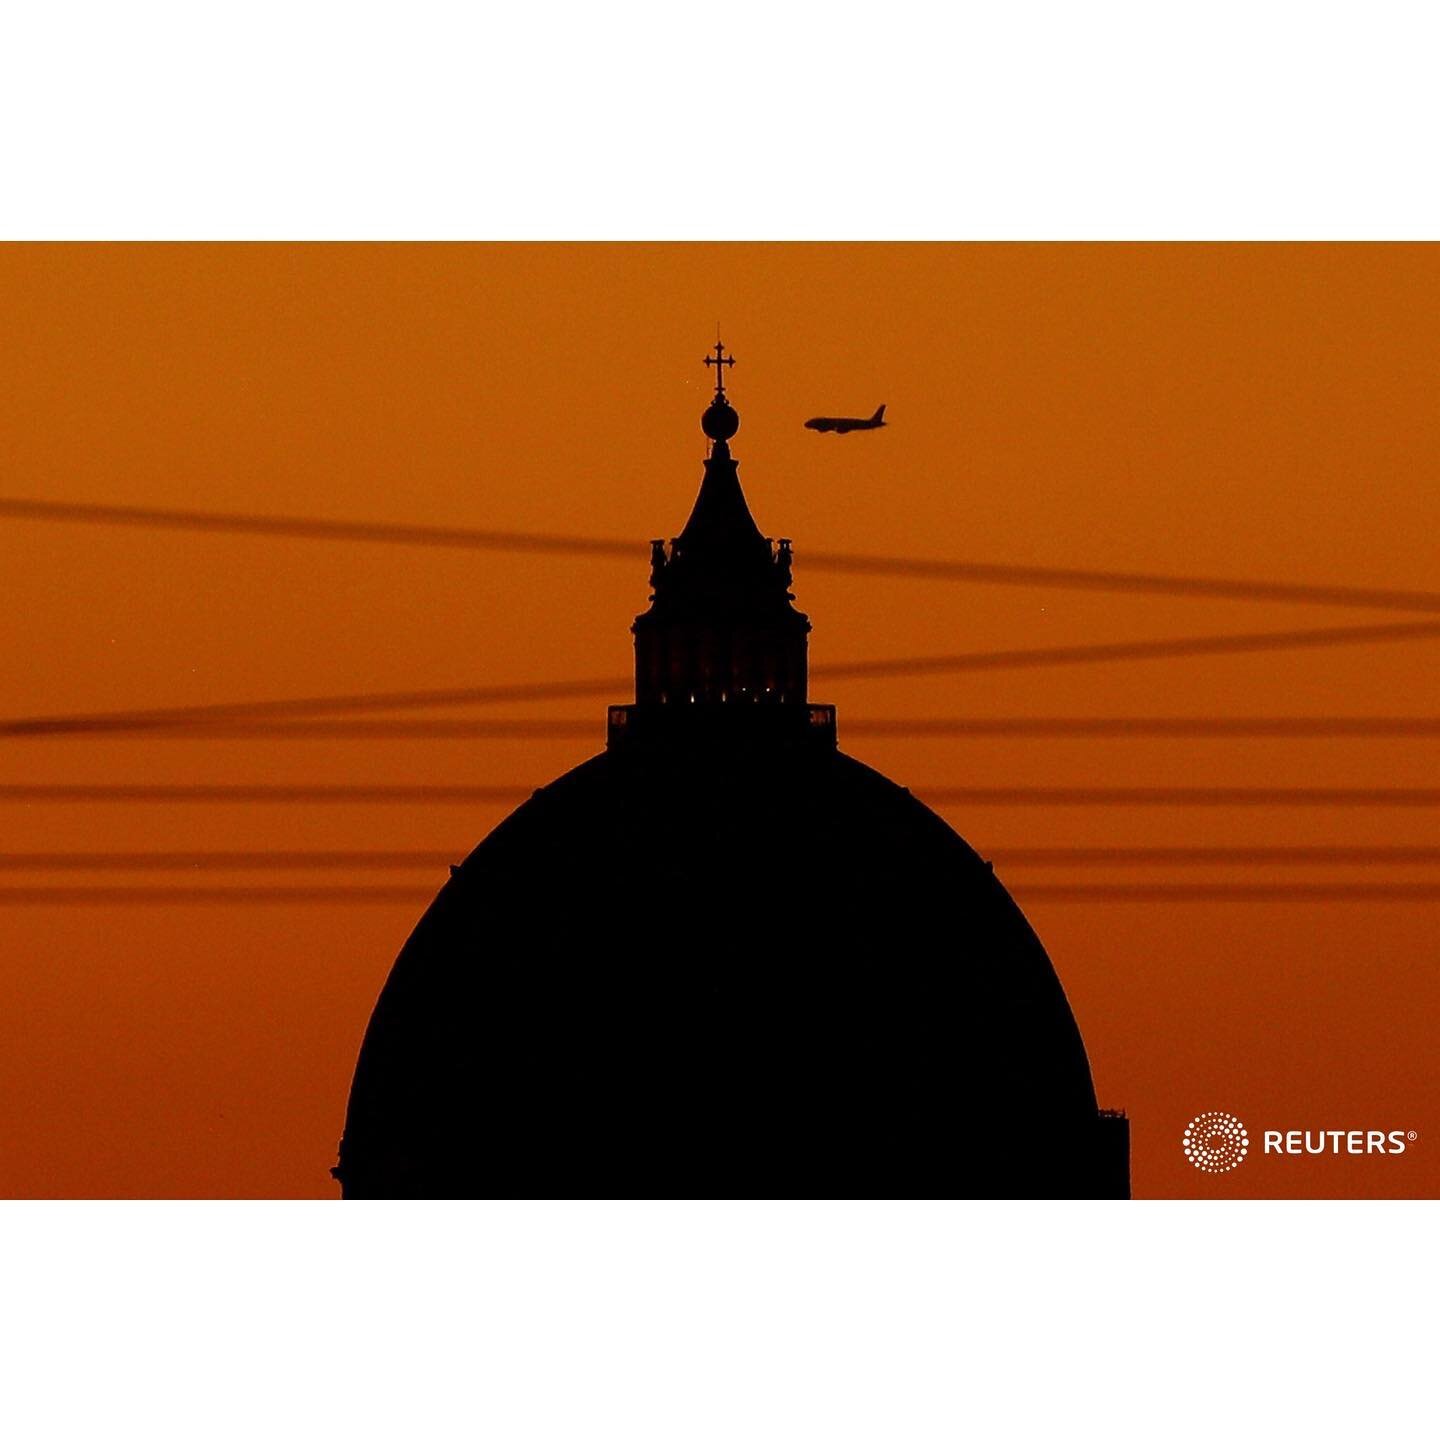 A plane flies across the sky beside the dome of Saint Peter's Basilica during sunset following the outbreak of the coronavirus disease (COVID-19) in Rome, Italy, August 19, 2020. 
.
.
.
.
.
#Italy #Rome #Vatican #St.Peter #SaintPeter #Basilica #Dome 